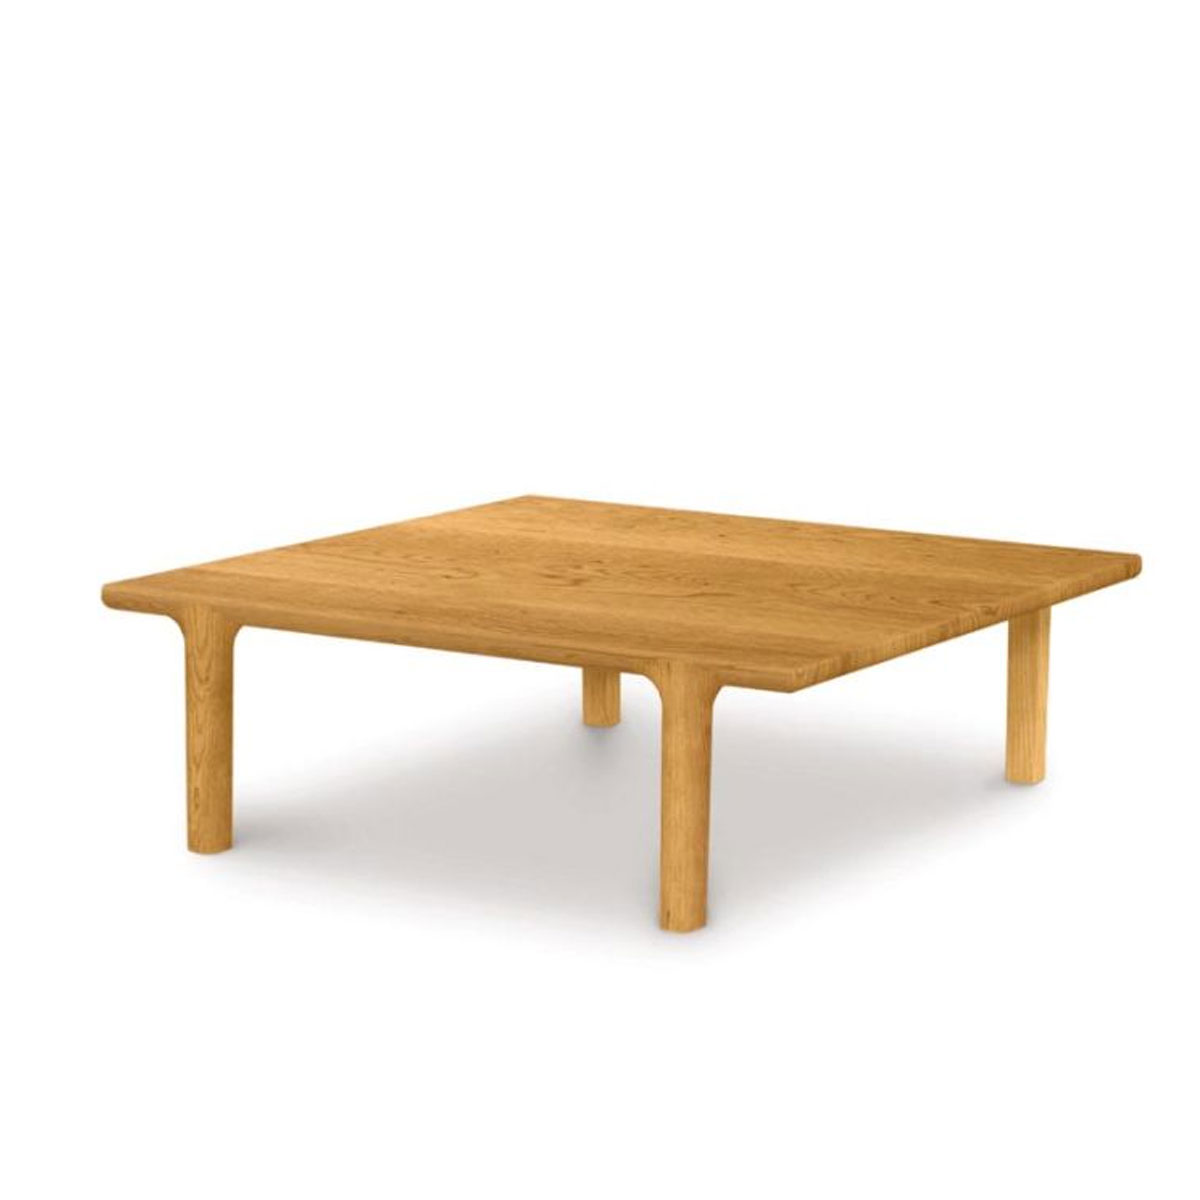 Copeland Sierra Square Coffee Table in Cherry